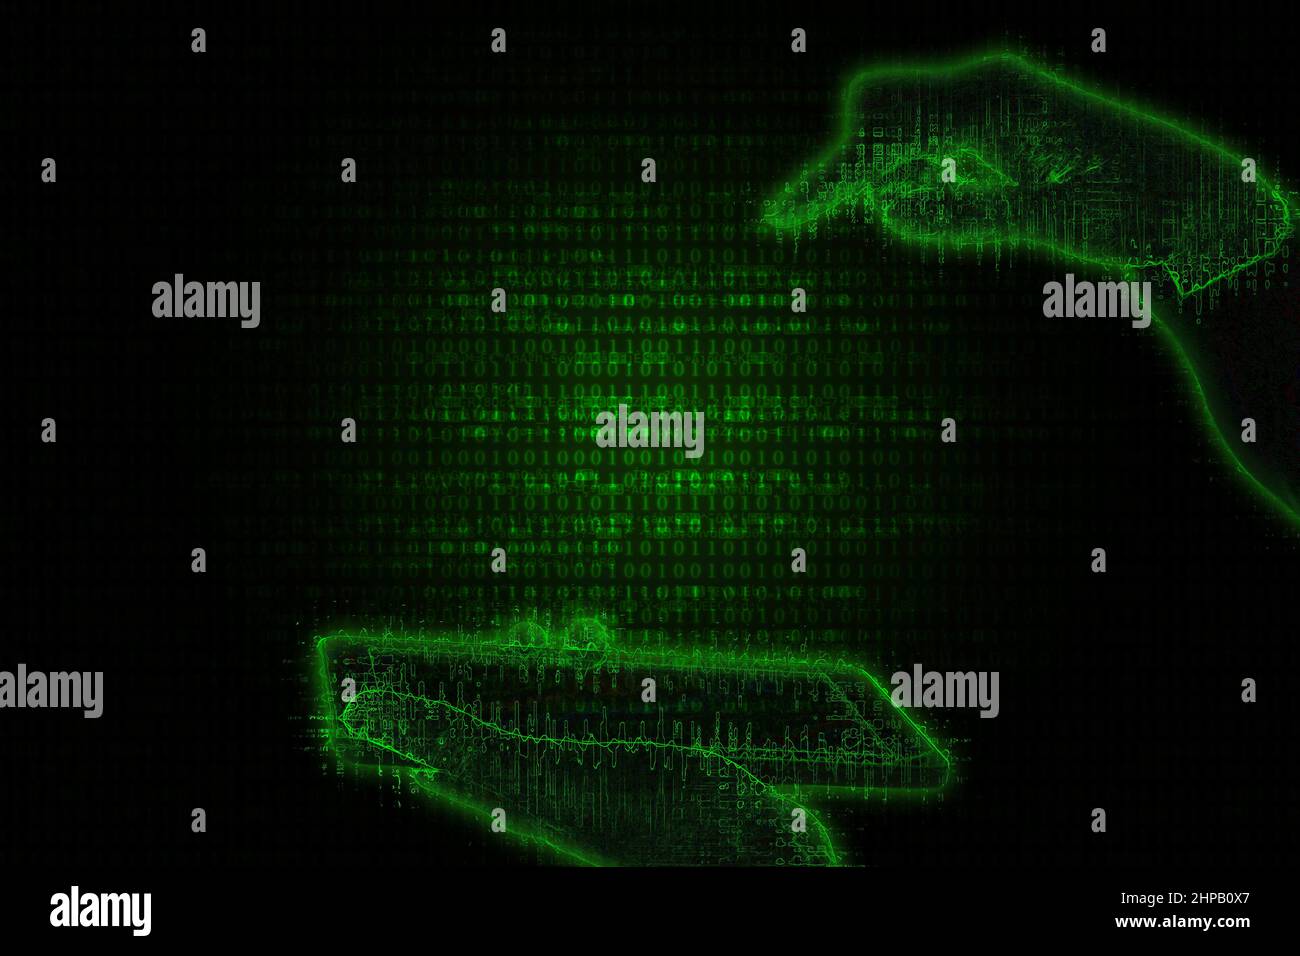 Blurred hand holding phone and hand pointing to space in futuristic green neon background with matrix binary code. Darkweb, darknet, hacking concept. Stock Photo